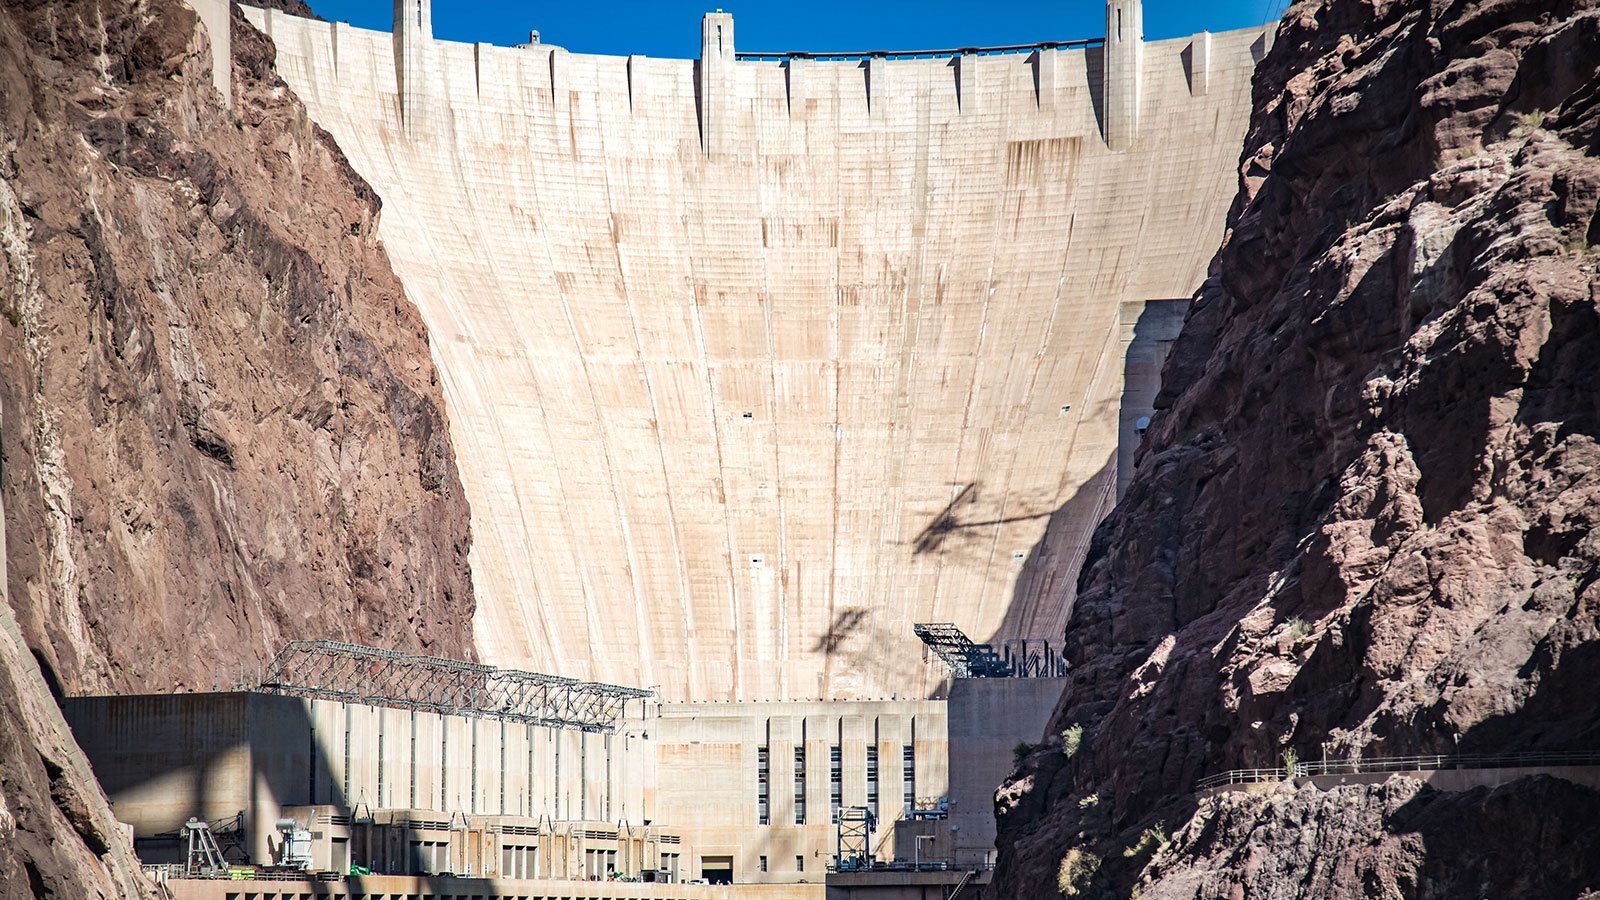 The Hoover Dam with the Hoover Dam Bypass in the foreground, 2017